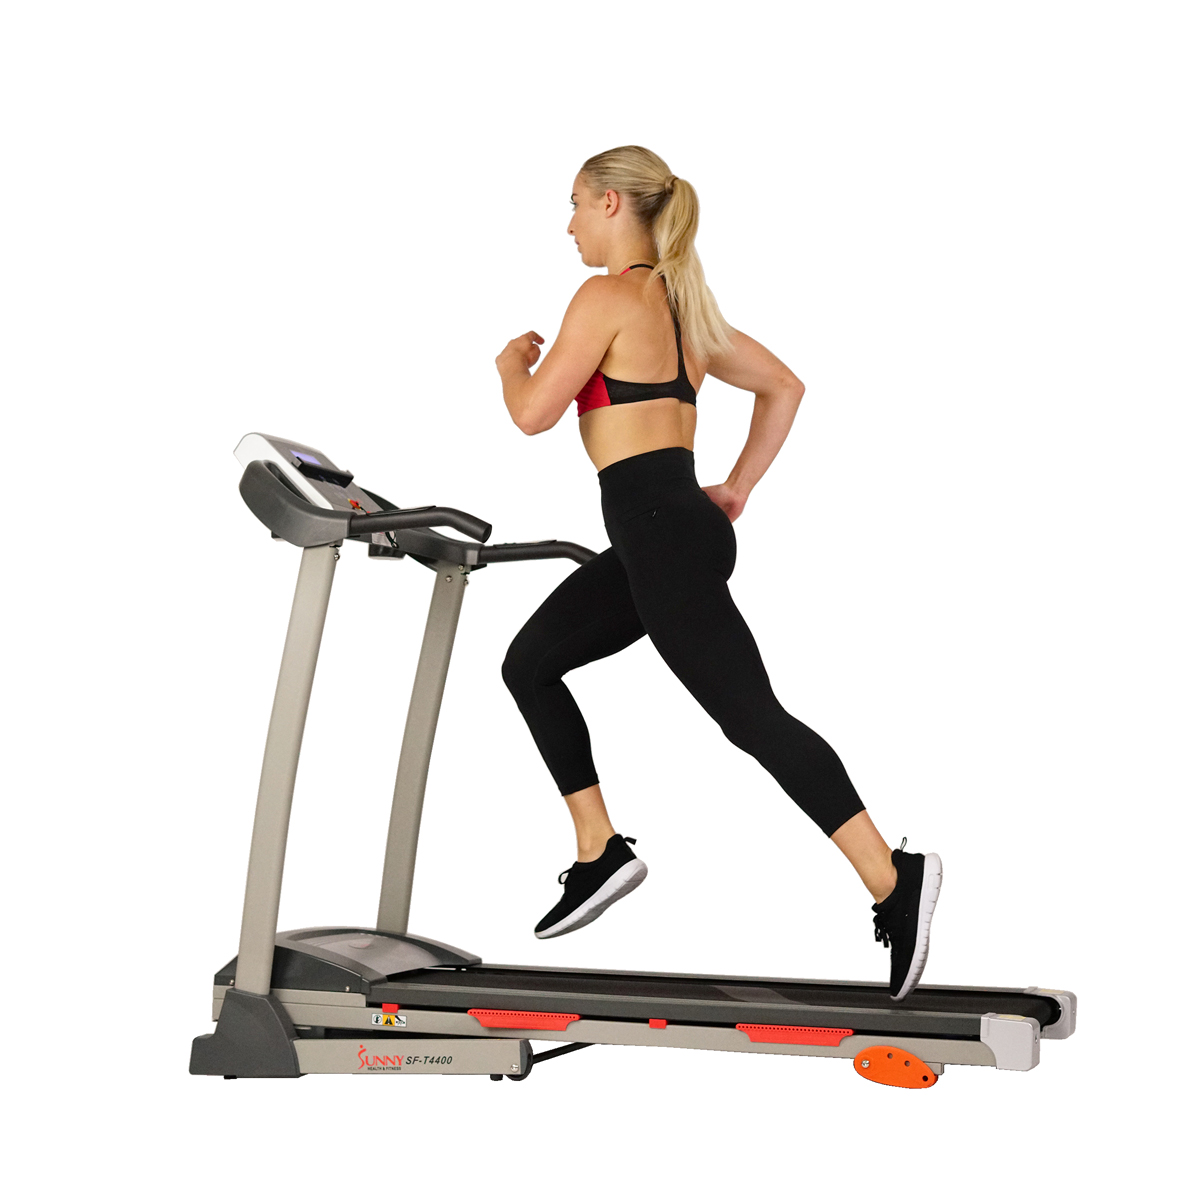 Sunny Health & Fitness T4400 Treadmill with Incline, Shock Absorption and Digital Display